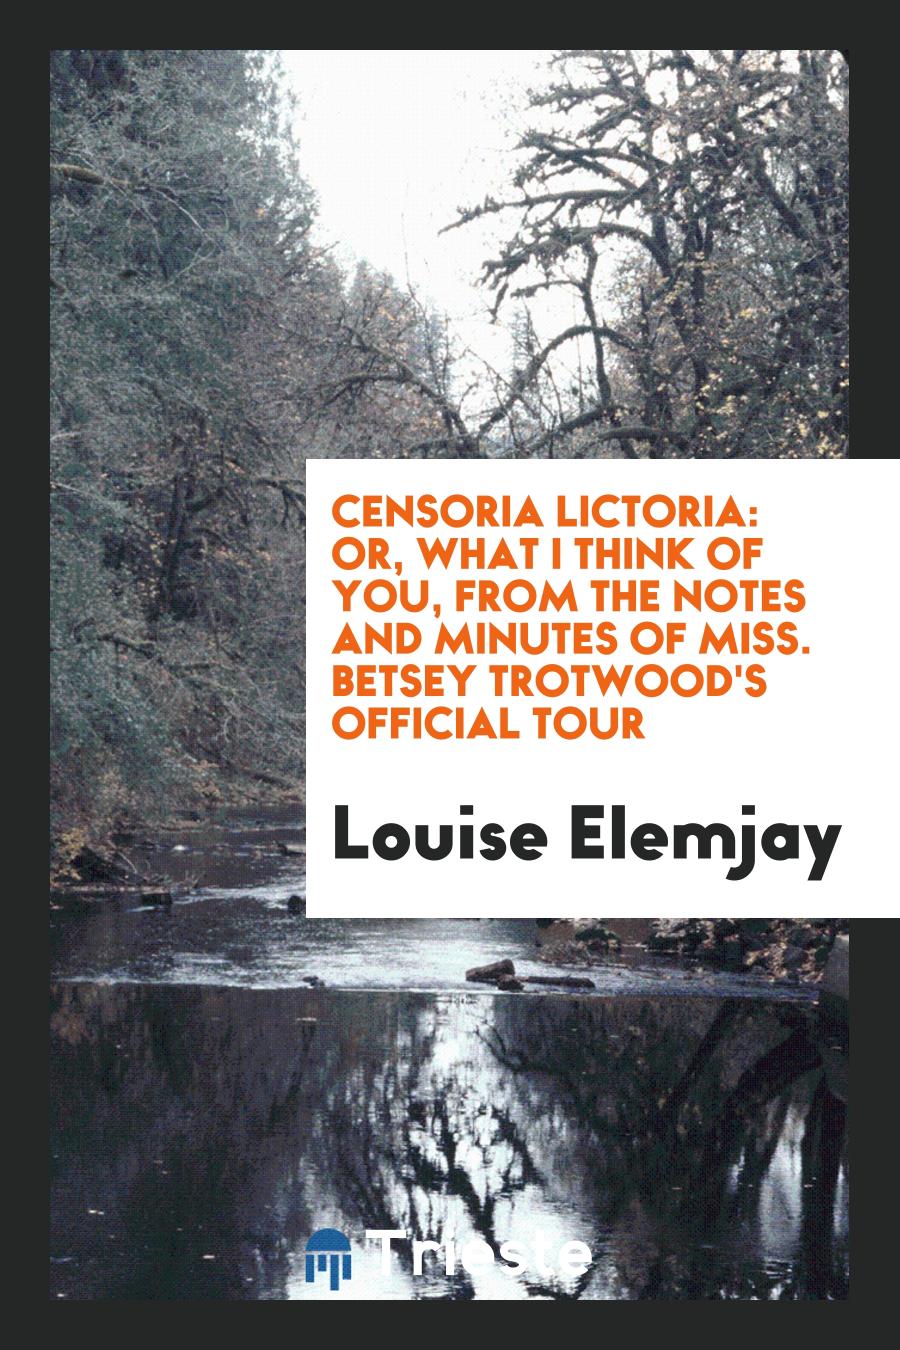 Censoria Lictoria: Or, What I Think of You, from the Notes and Minutes of Miss. Betsey Trotwood's Official Tour